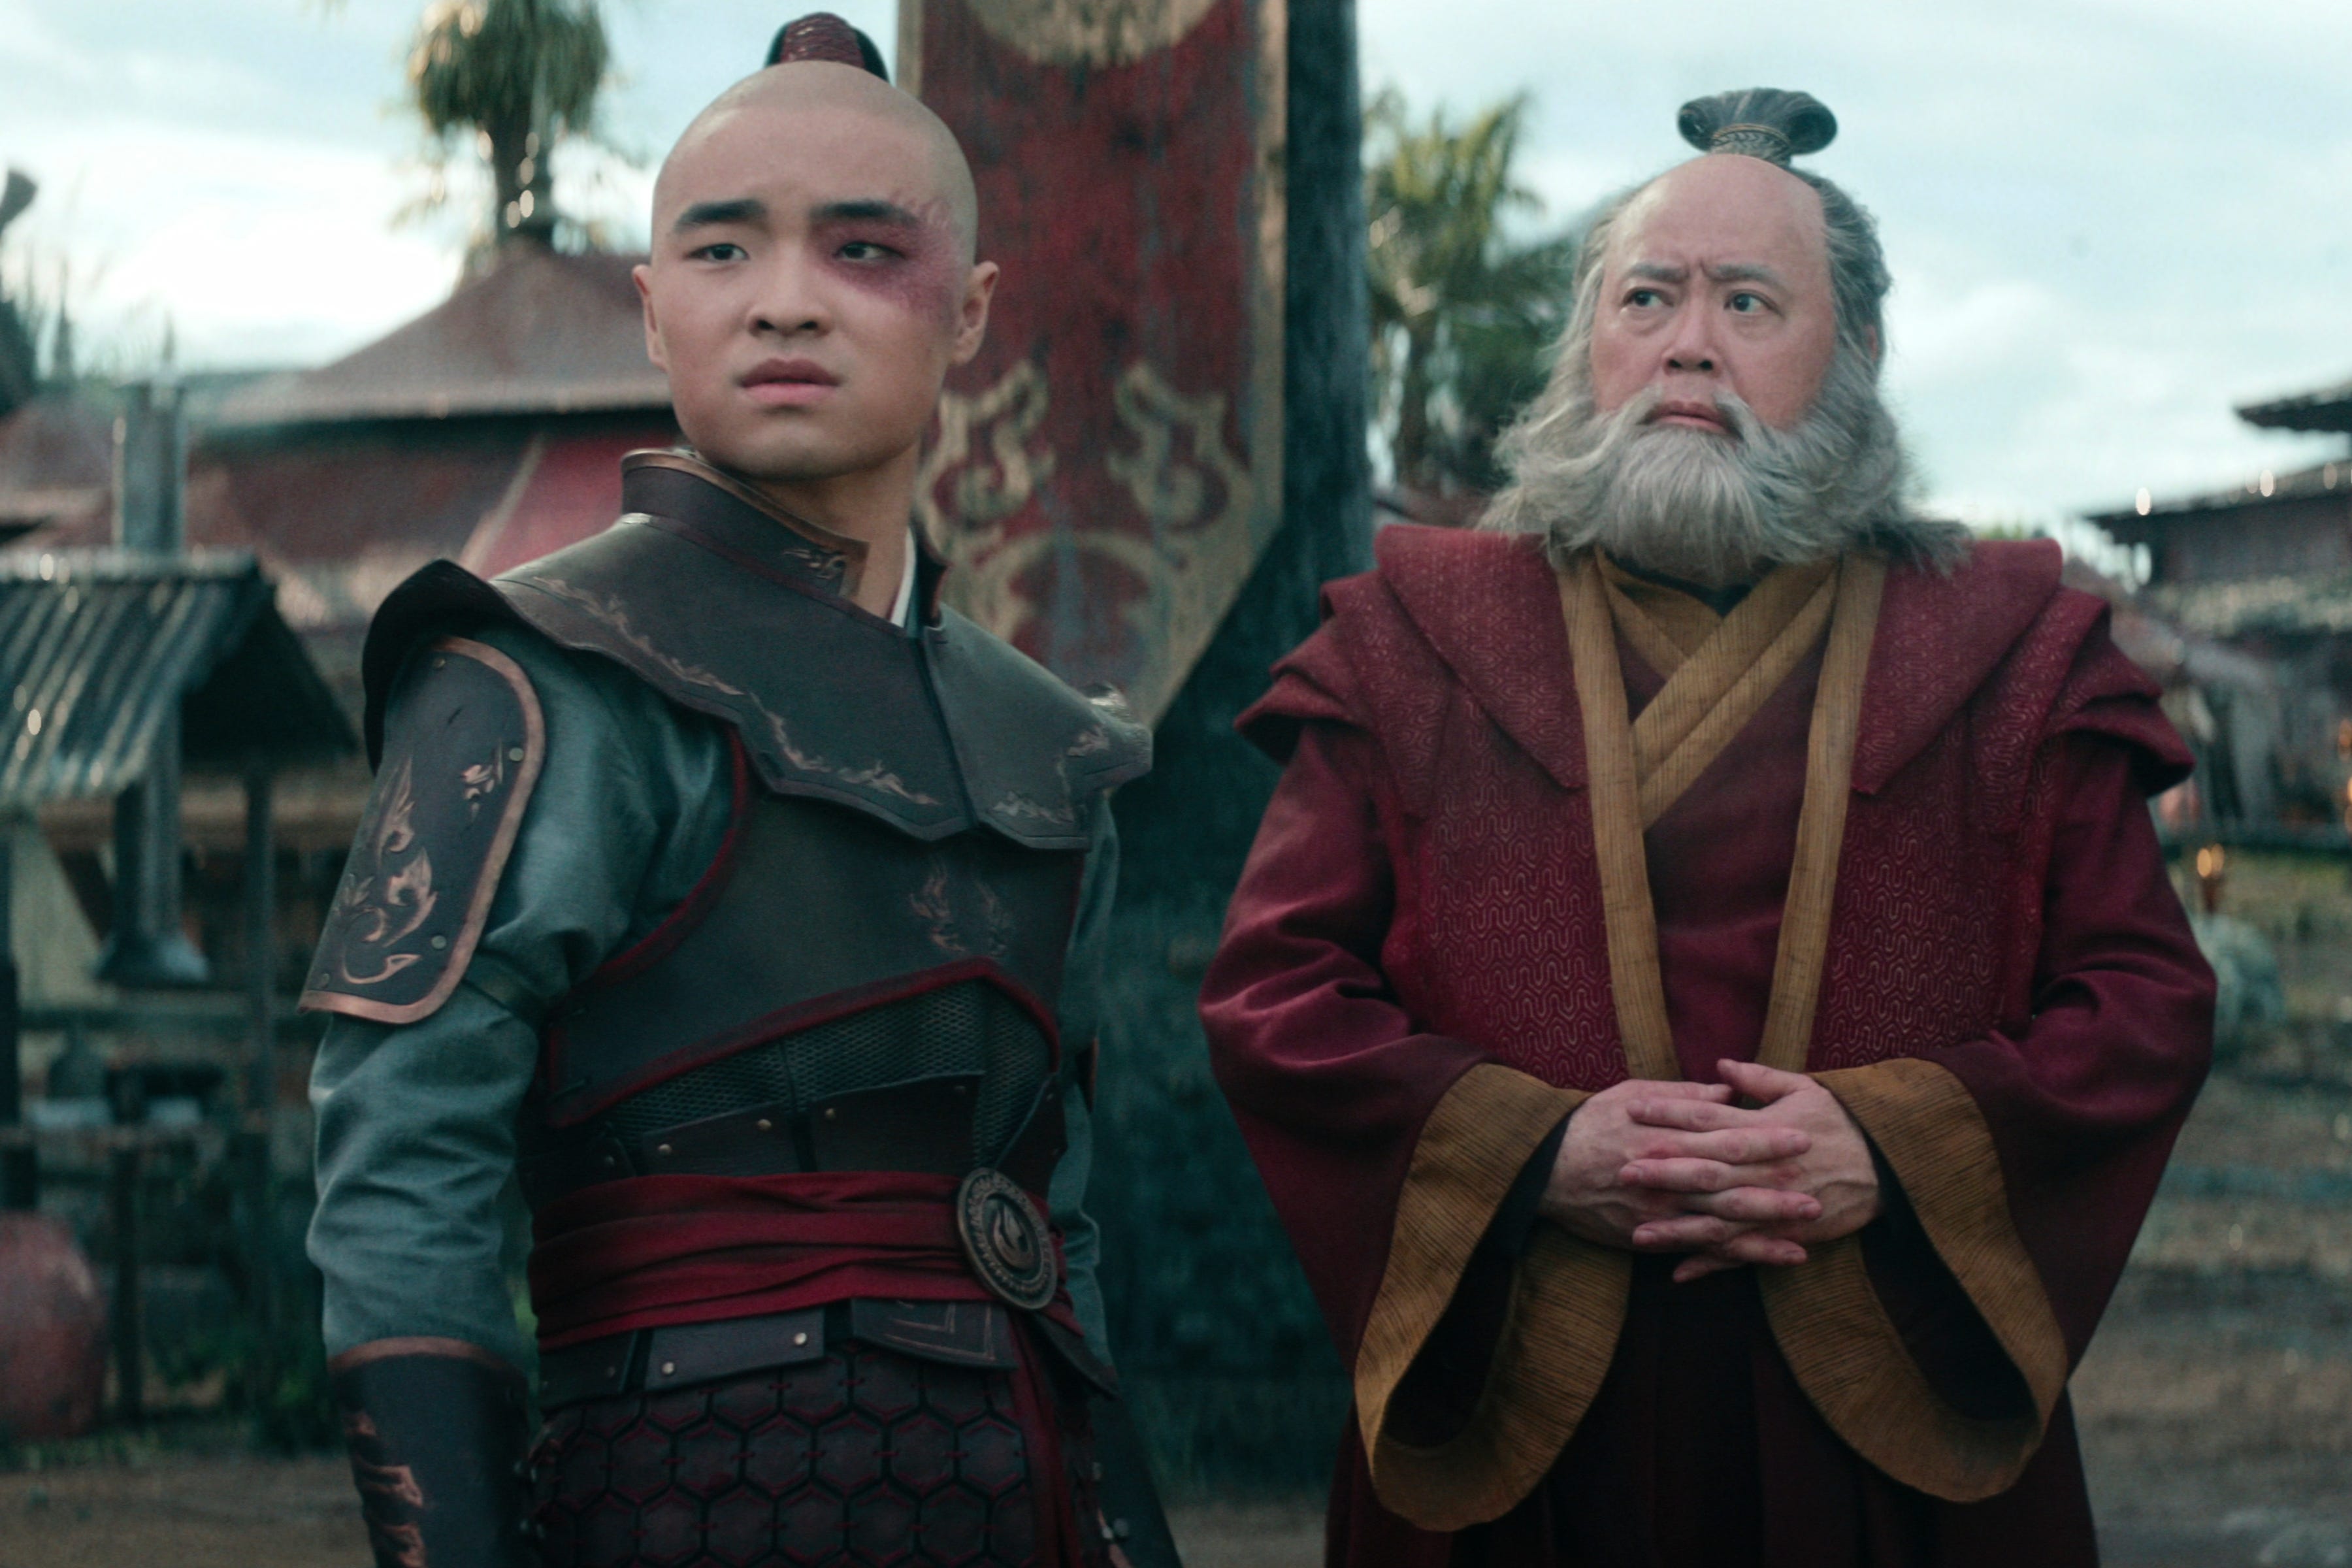 review: netflix's 'avatar: the last airbender' is a failure in every way